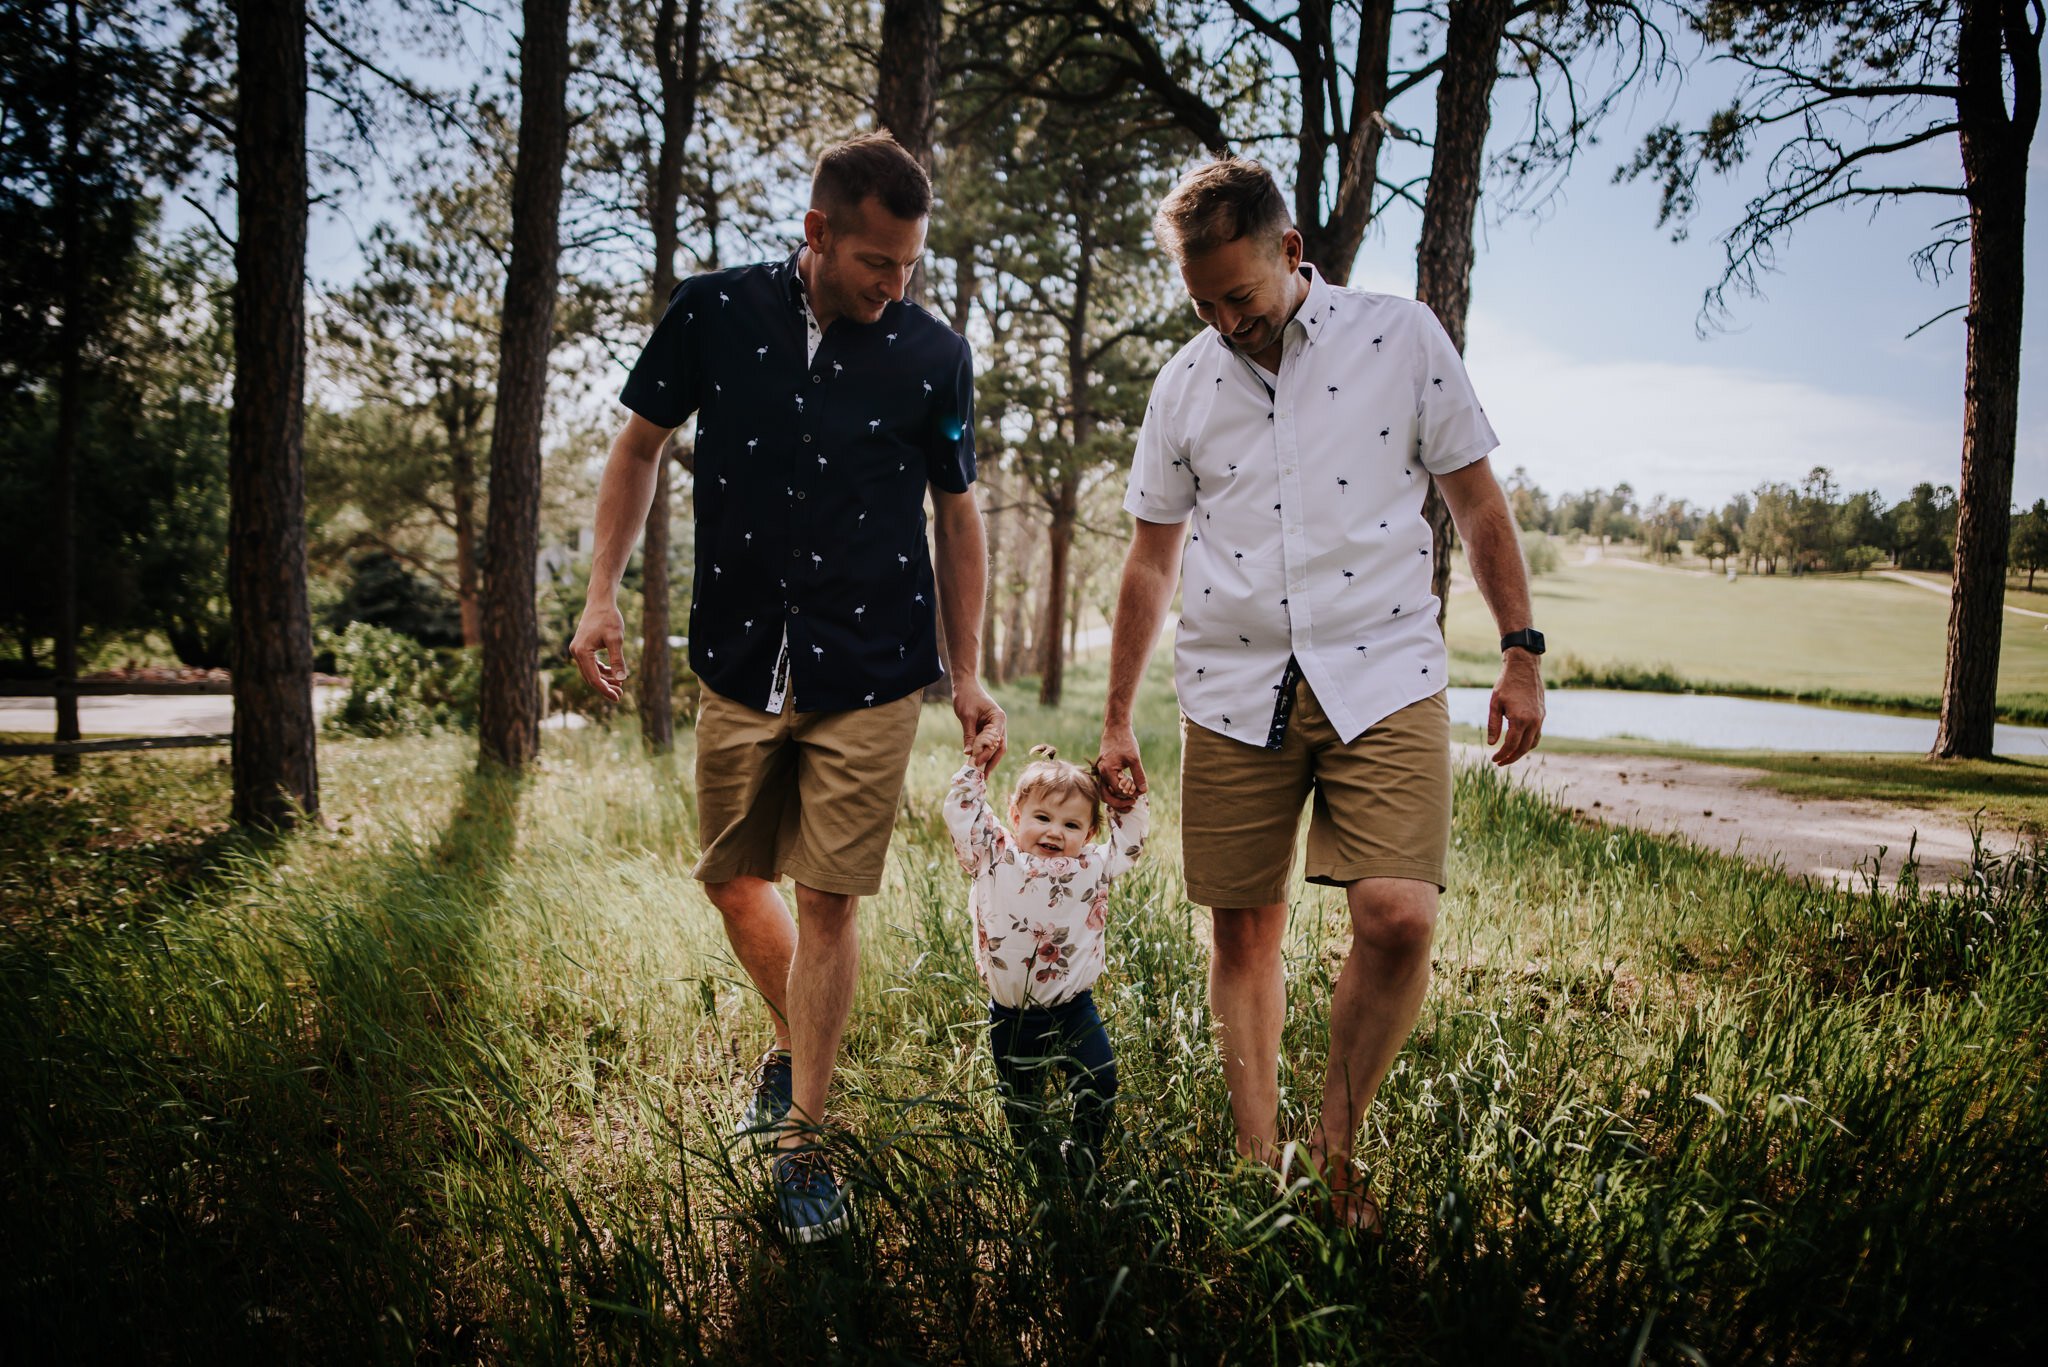 Paul+and+Dave+Gay+Couple+Family+Session+Colorado+Springs+Colorado+LGBTQ+Dads+Daughter+Wild+Prairie+Photography-24-2020.jpeg